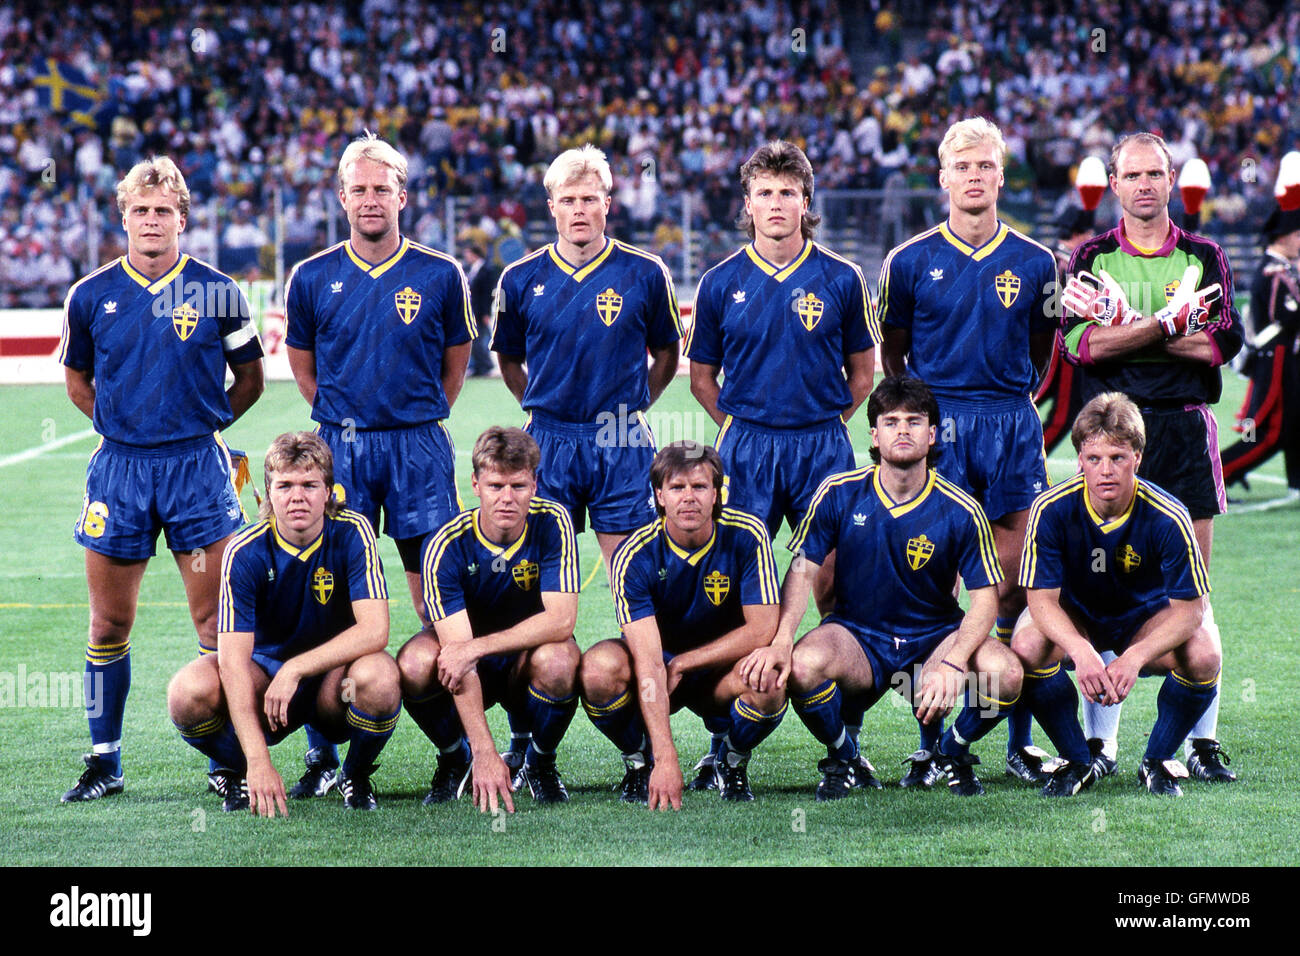 Sweden team group line-up (SWE), JUNE 10, 1990 - Football / Soccer : Sweden team group shot (Top row - L to R) Jonas Thern, Mats Magnusson, Peter Larsson, Roger Ljung, Klas Ingesson, Thomas Ravelli, (Bottom row - L to R) Tomas Brolin, Joakim Nilsson, Roland Nilsson, Anders Limpar and Stefan Schwarz before the 1990 FIFA World Cup Italy Group C match between Brazil 2-1 Sweden at Stadio delle Alpi in Turin, Italy. (Photo by Juha Tamminen/AFLO) (Minumum pricing : EUR100 per picture) Stock Photo